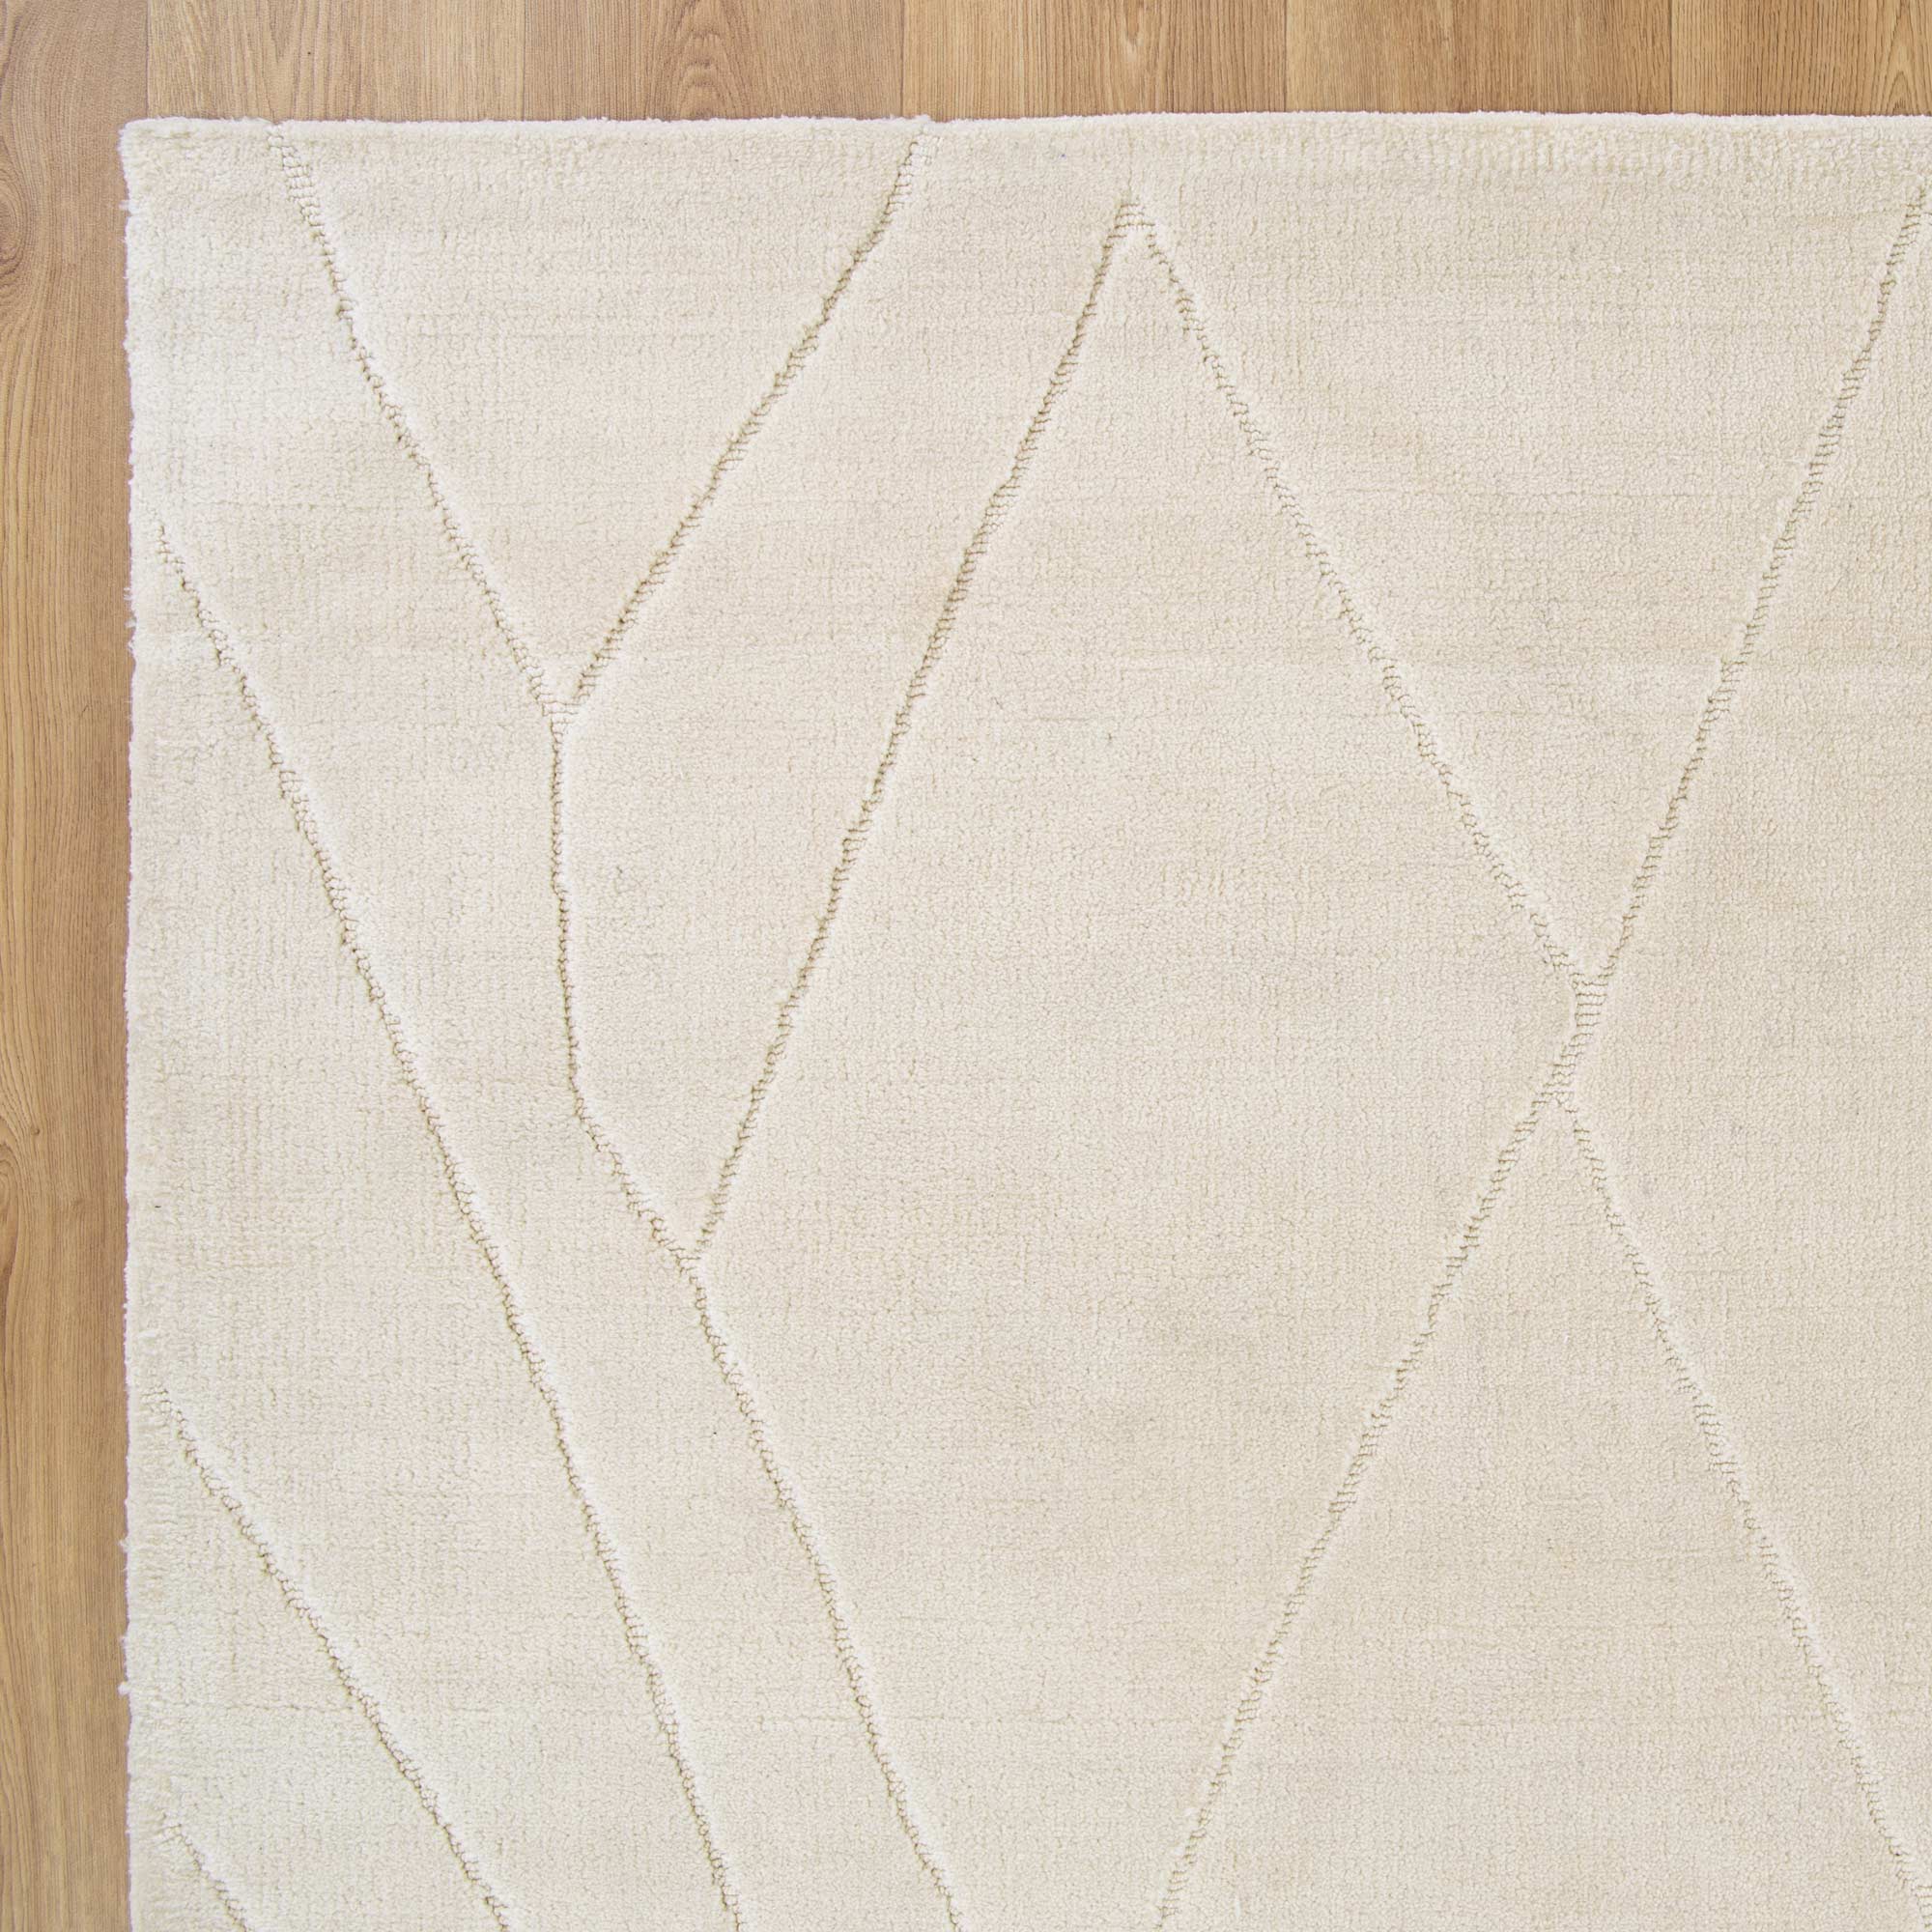 Detailed close-up of the Kendra Rug's rich, textured polyester fiber, showcasing its sumptuous and plush quality.